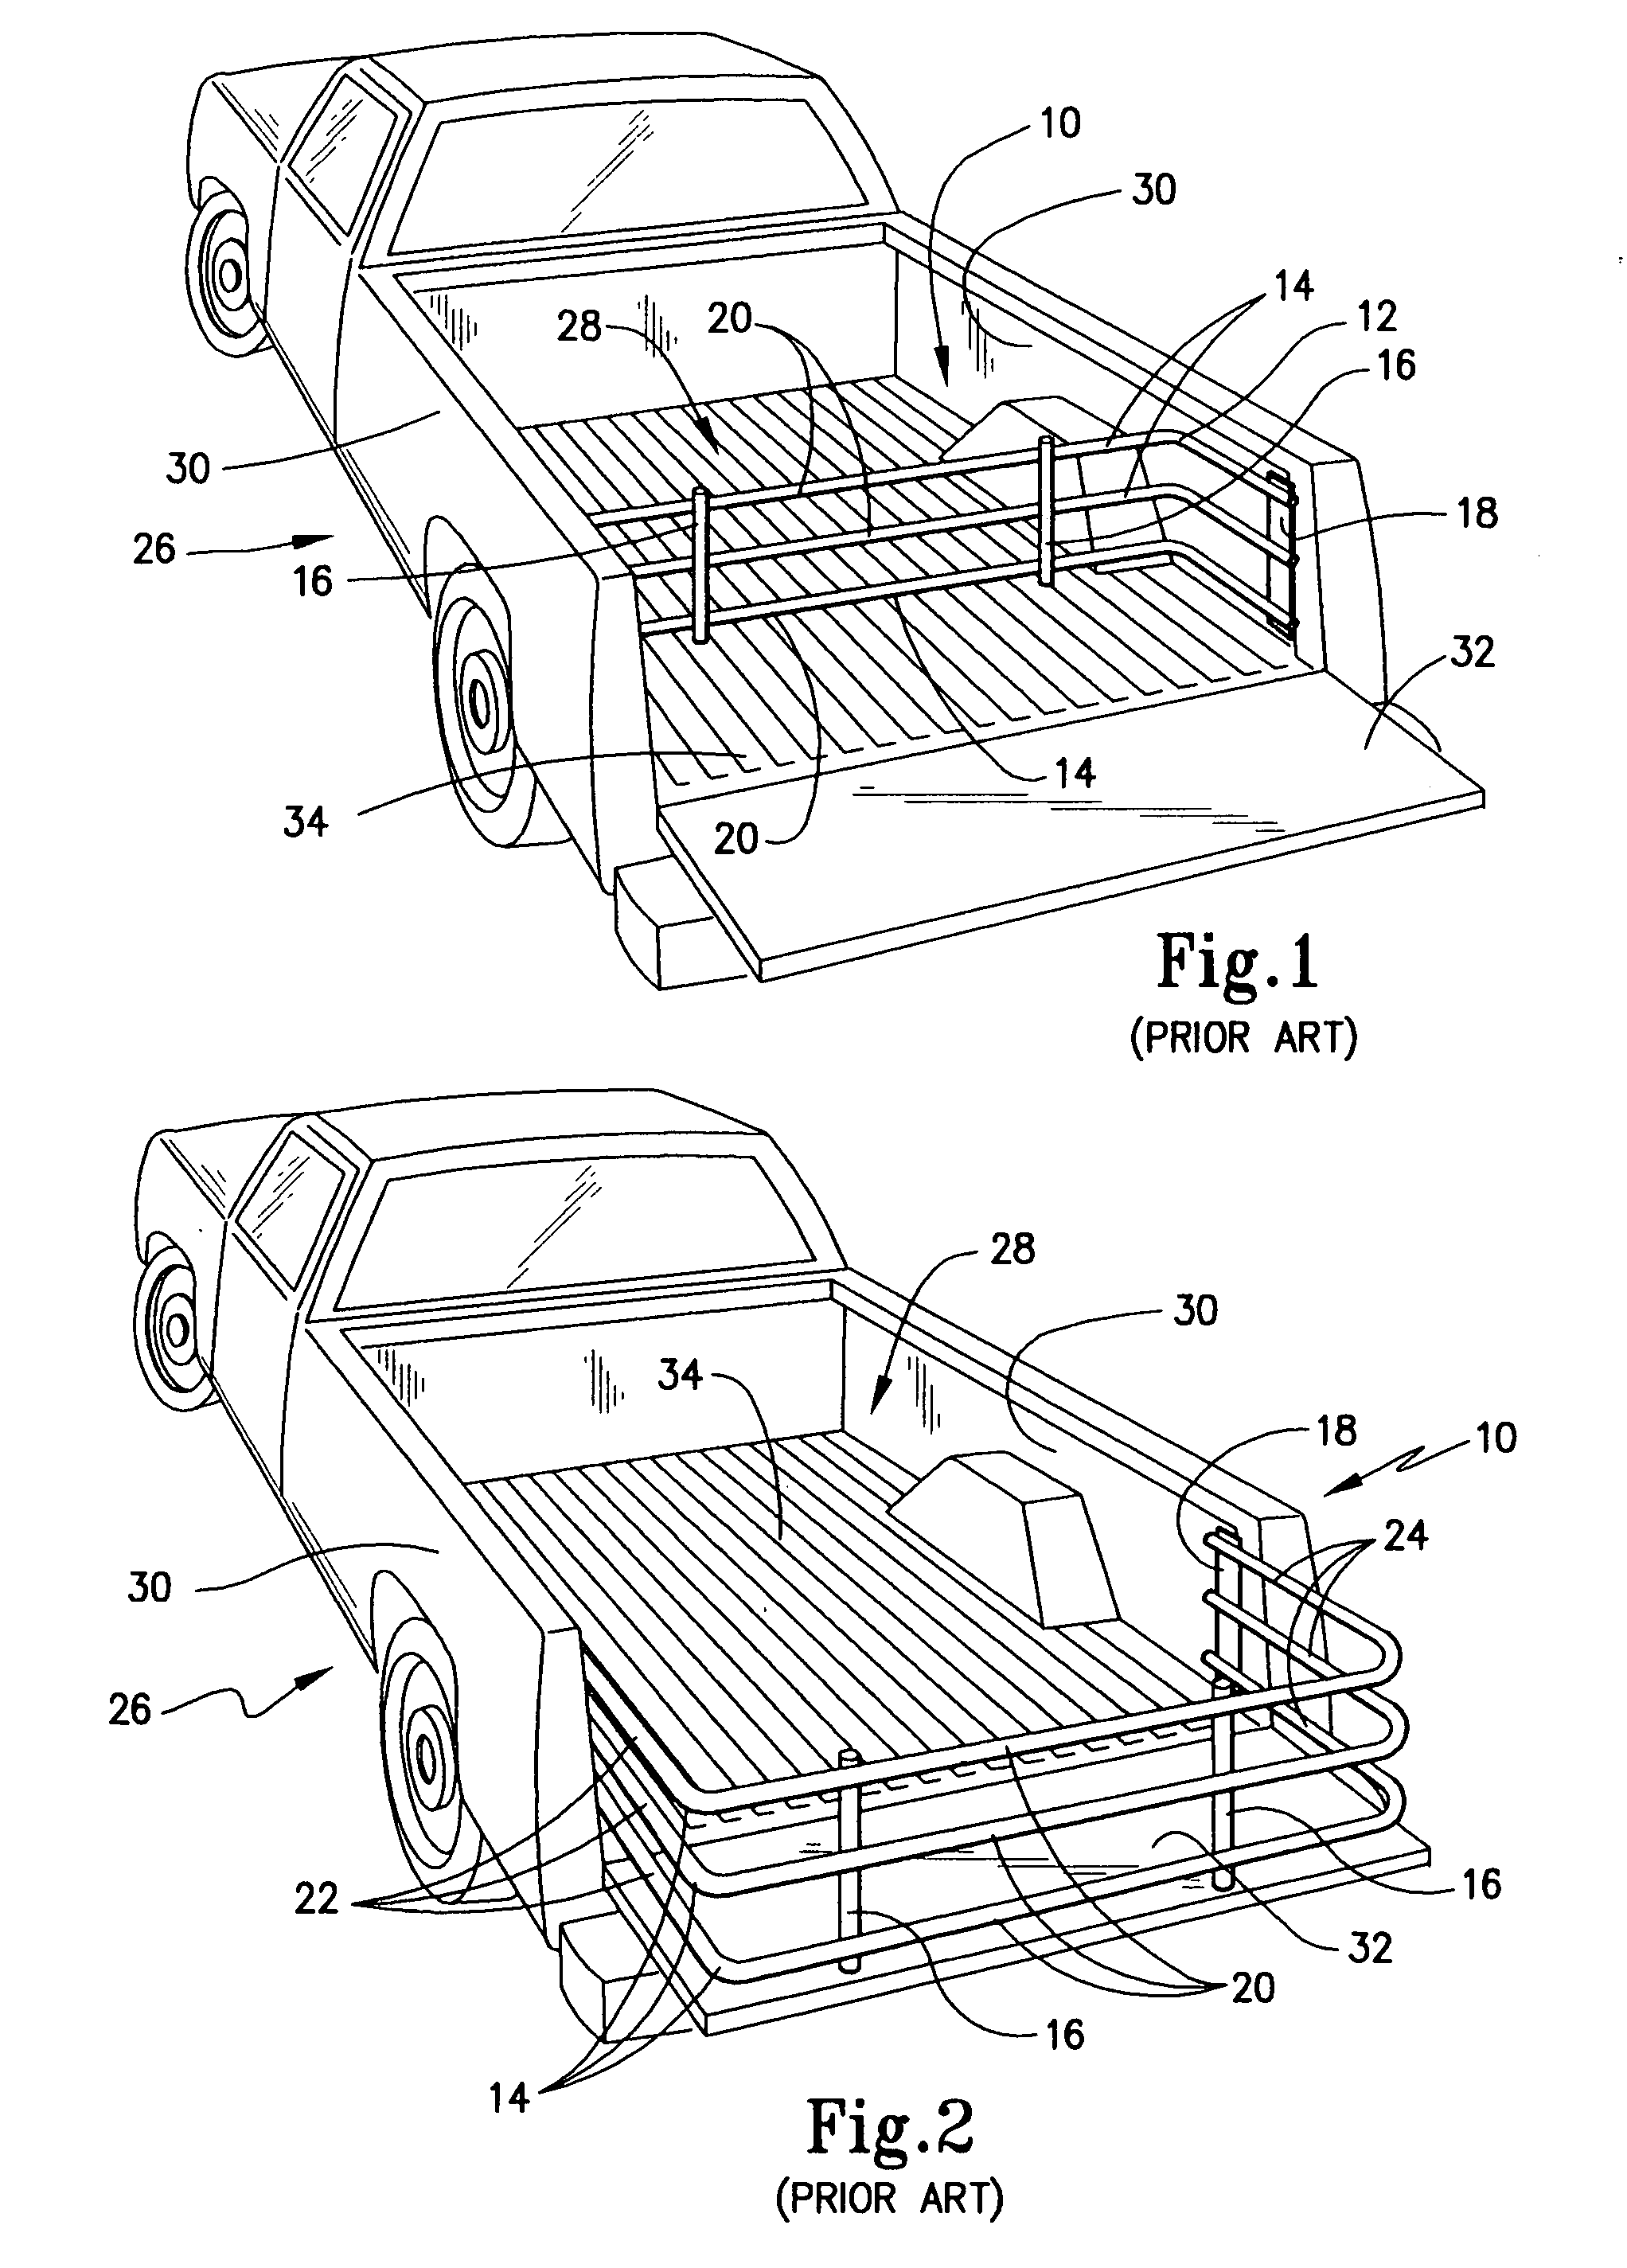 Cover assembly for truck bed extender